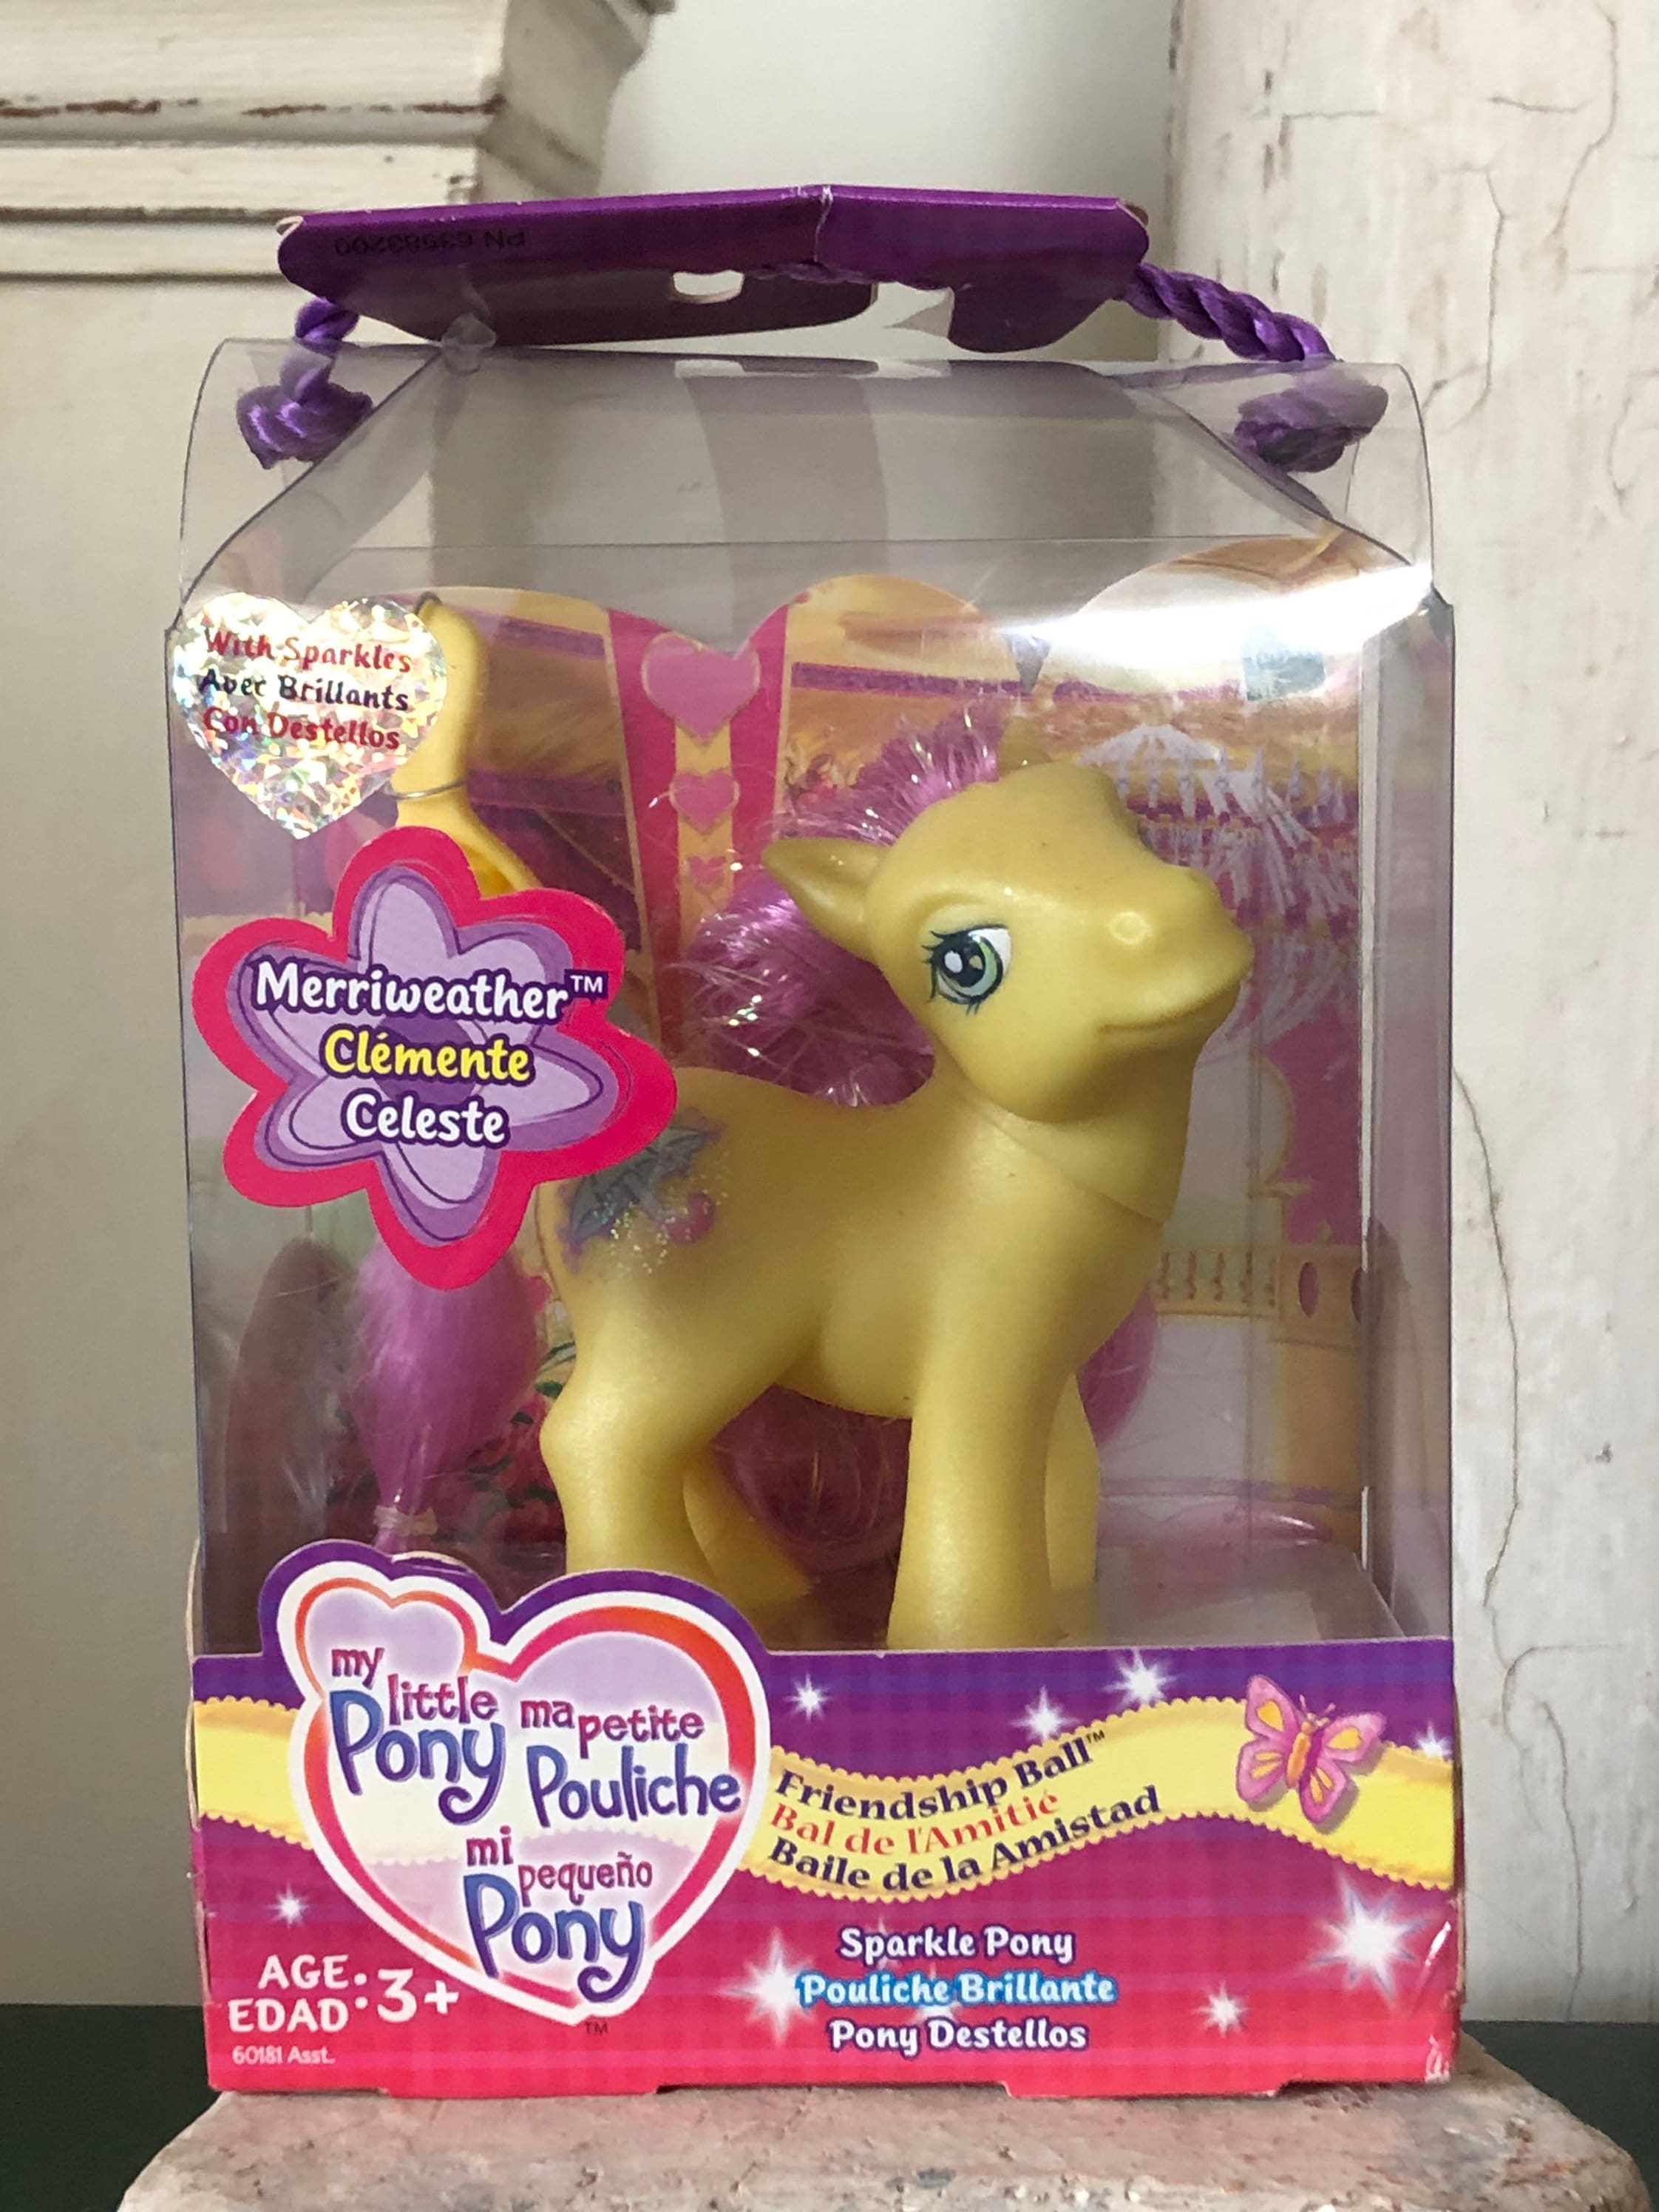 My Little Pony G3 Friendship Ball Sparkle Starbeam Hasbro Toy Figure for sale online 